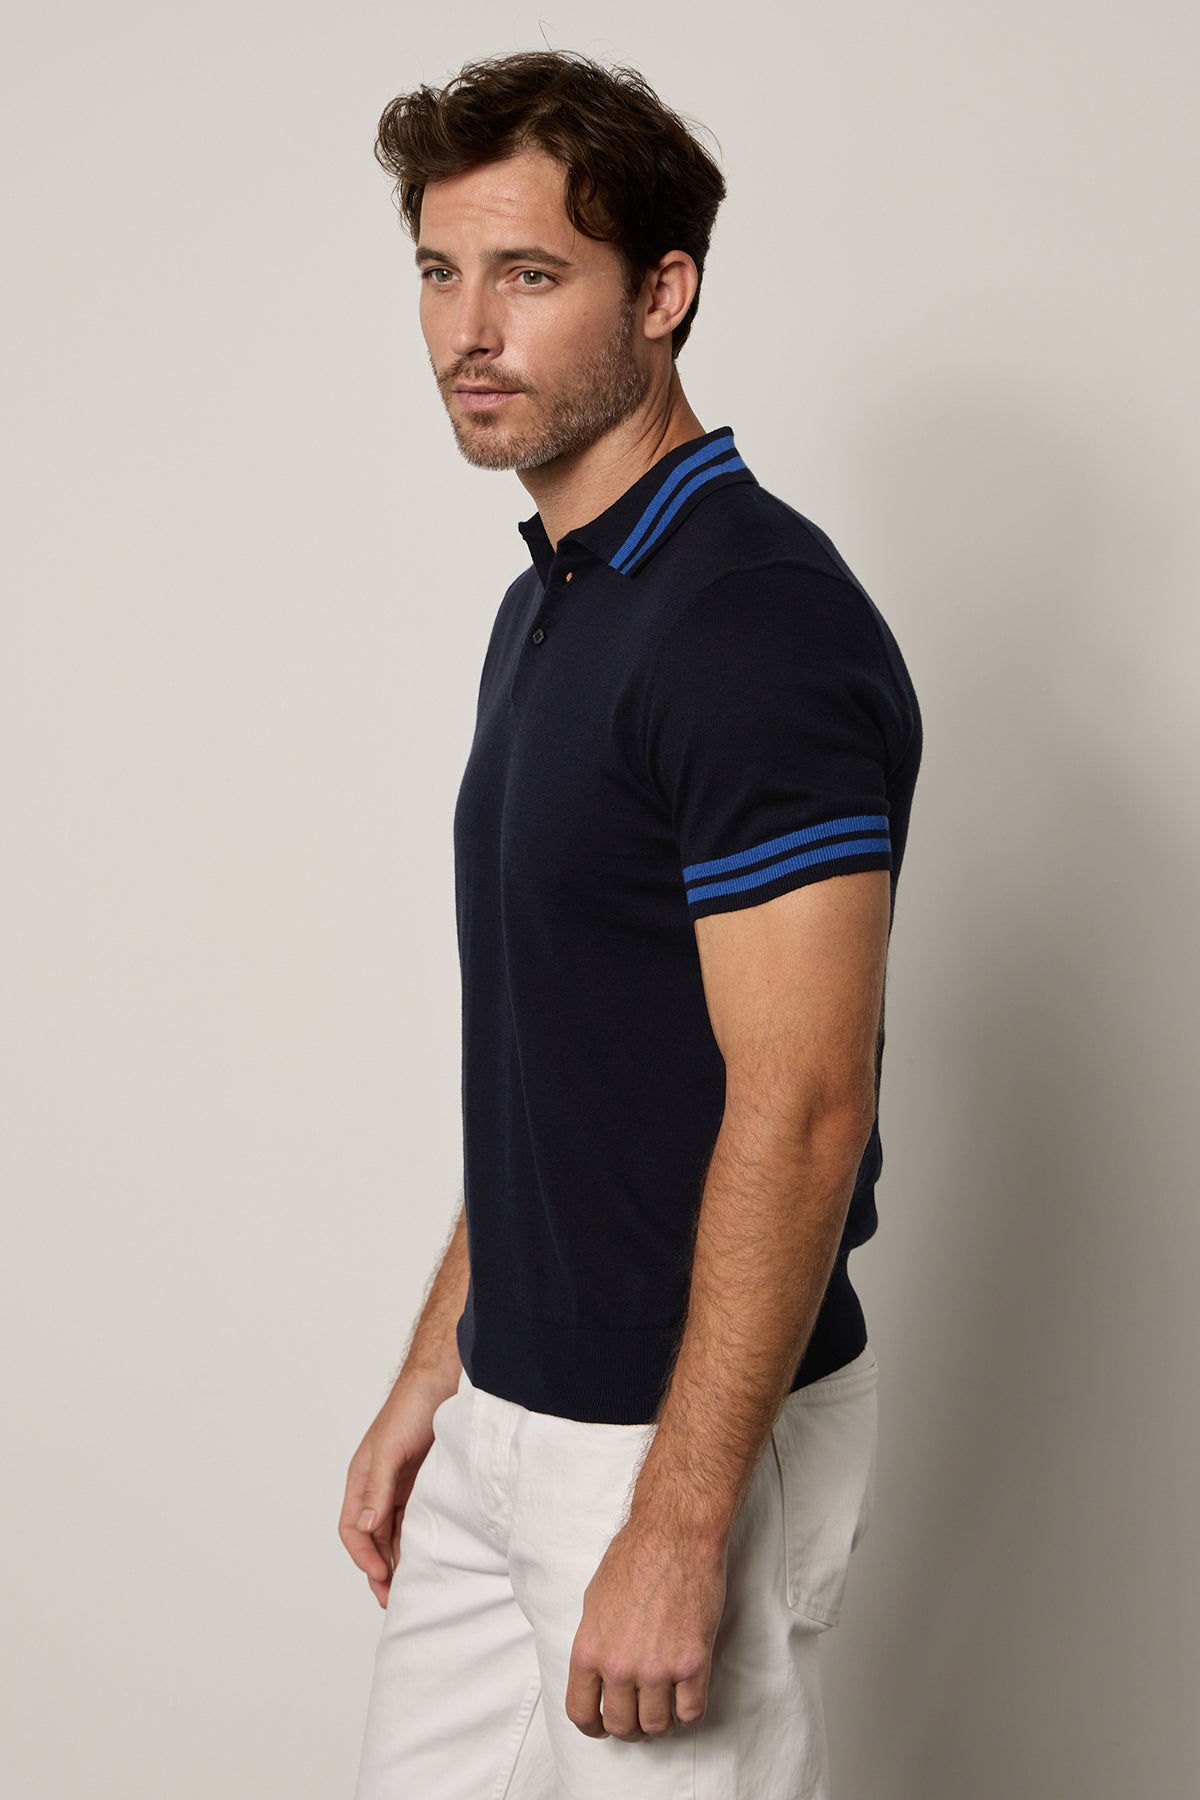 Hogan Polo in navy linen blend with double stripes on collar and sleeves with white denim side-26249278521537